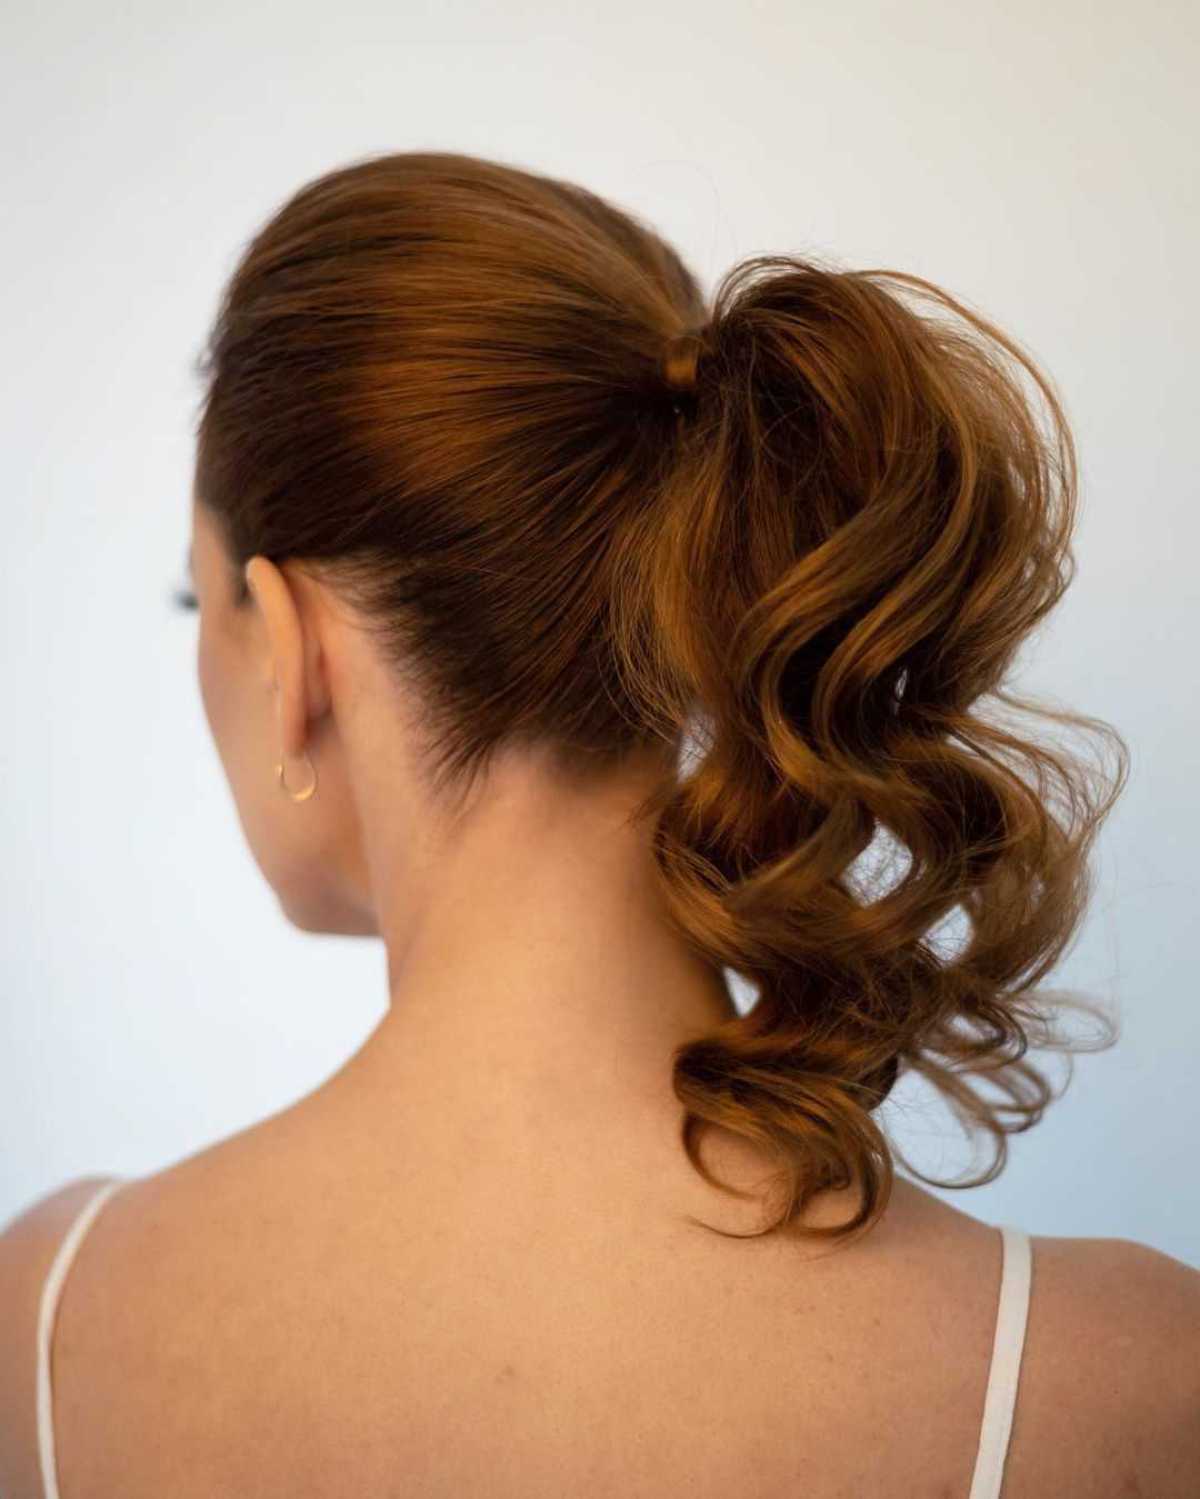 High Pony with Copper Voluminous Waves for Prom Night